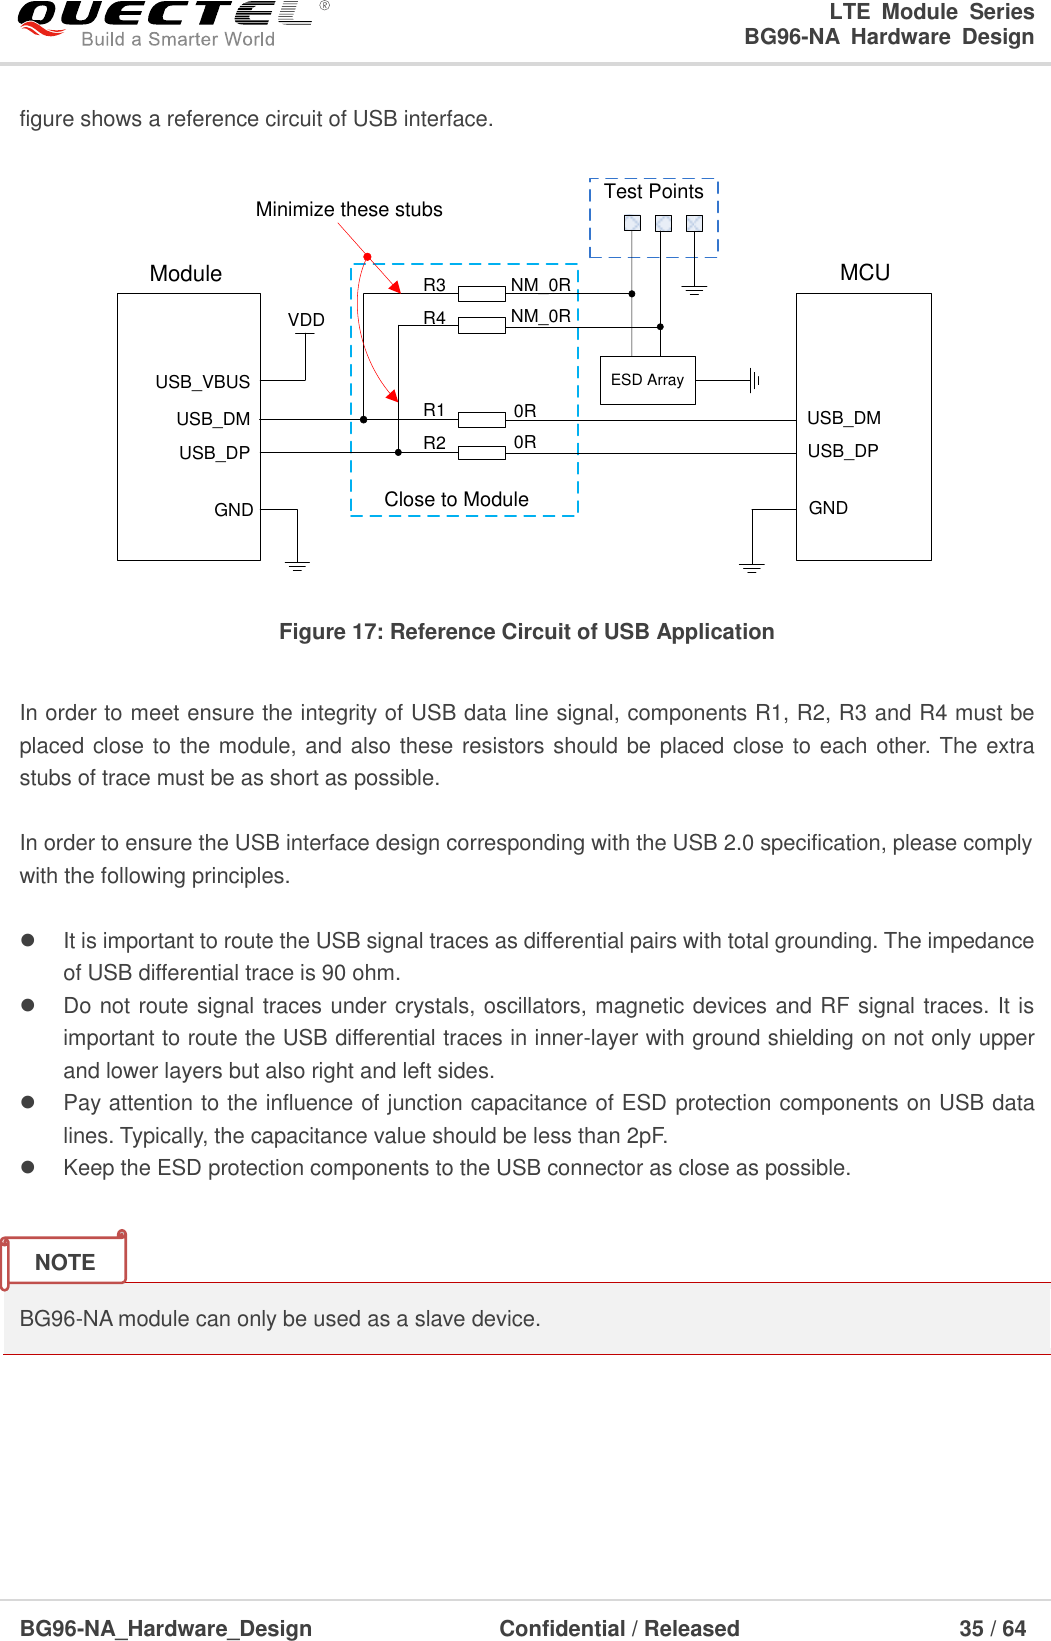 LTE  Module  Series                                                  BG96-NA  Hardware  Design  BG96-NA_Hardware_Design                              Confidential / Released                                  35 / 64    figure shows a reference circuit of USB interface. USB_DPUSB_DMGNDUSB_DPUSB_DMGNDR1R2Close to ModuleR3R4Test PointsESD ArrayNM_0RNM_0R0R0RMinimize these stubsModule MCUUSB_VBUSVDD Figure 17: Reference Circuit of USB Application  In order to meet ensure the integrity of USB data line signal, components R1, R2, R3 and R4 must be placed close to the module, and also these resistors should be placed close to each other. The extra stubs of trace must be as short as possible.  In order to ensure the USB interface design corresponding with the USB 2.0 specification, please comply with the following principles.    It is important to route the USB signal traces as differential pairs with total grounding. The impedance of USB differential trace is 90 ohm.   Do not route signal traces under crystals, oscillators, magnetic devices and RF signal traces. It is important to route the USB differential traces in inner-layer with ground shielding on not only upper and lower layers but also right and left sides.   Pay attention to the influence of junction capacitance of ESD protection components on USB data lines. Typically, the capacitance value should be less than 2pF.   Keep the ESD protection components to the USB connector as close as possible.   BG96-NA module can only be used as a slave device.      NOTE 